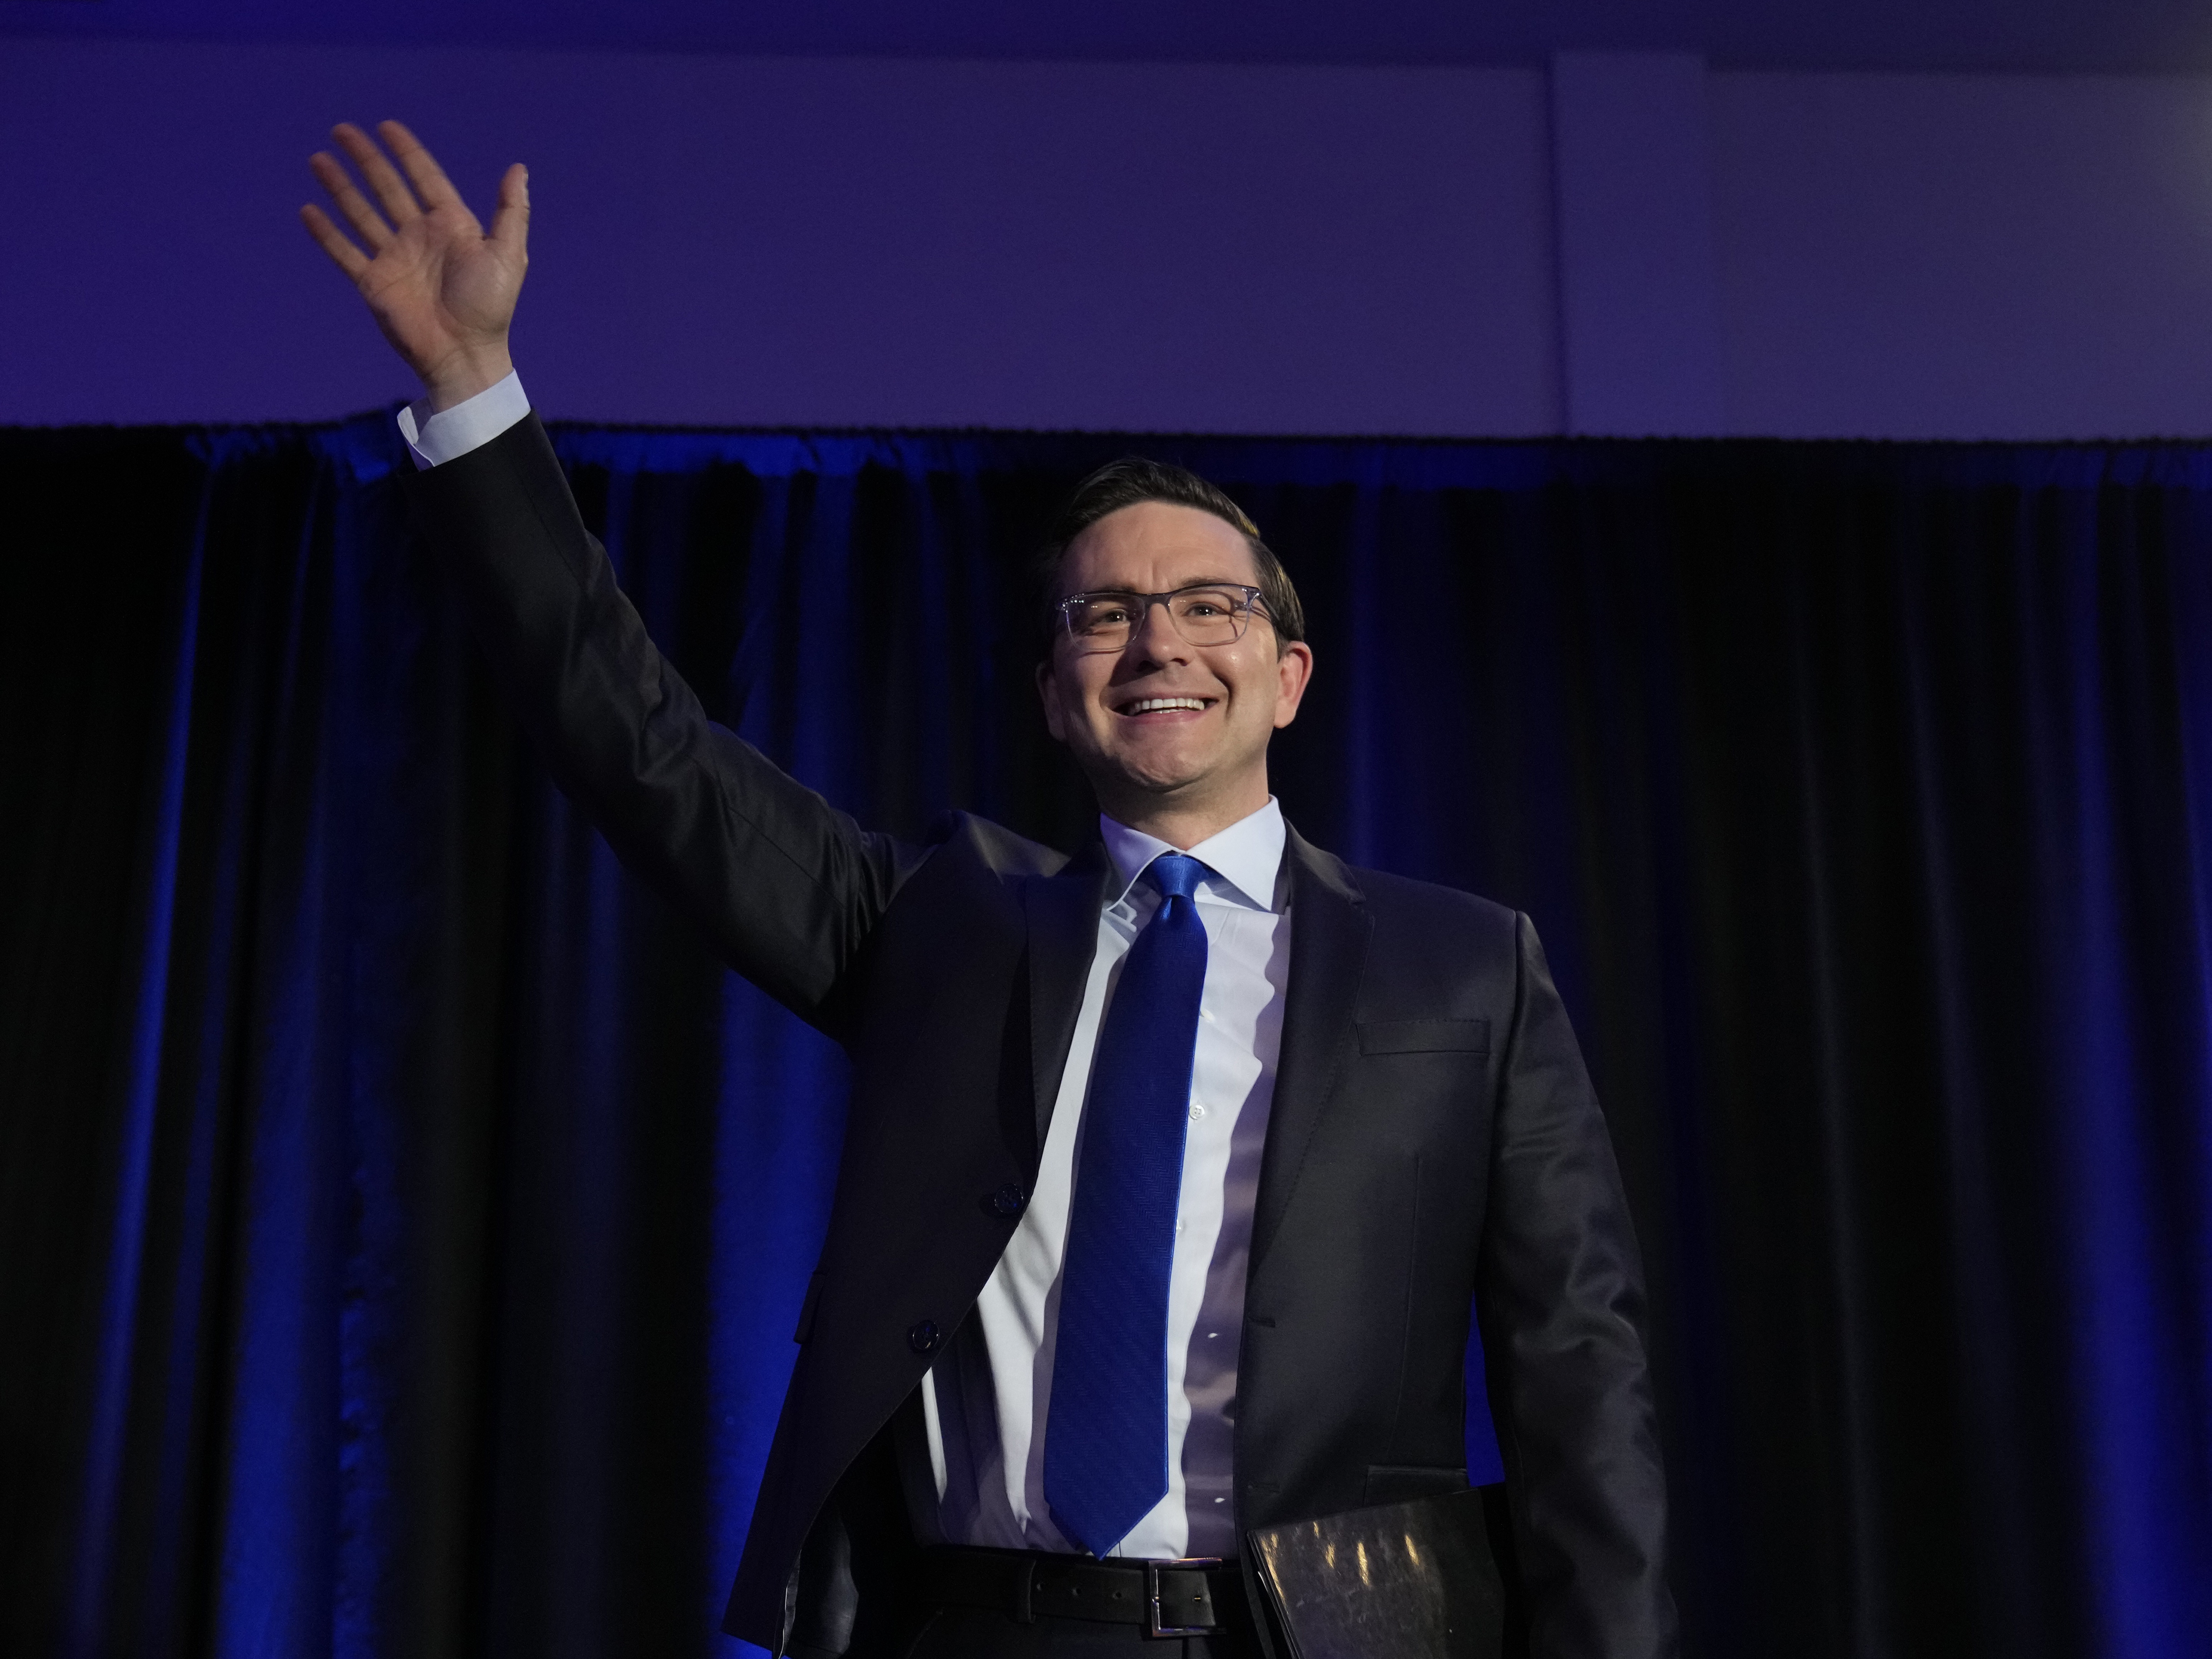 Poilievre popular among Conservative voters, but not all Canadians feel the same: poll